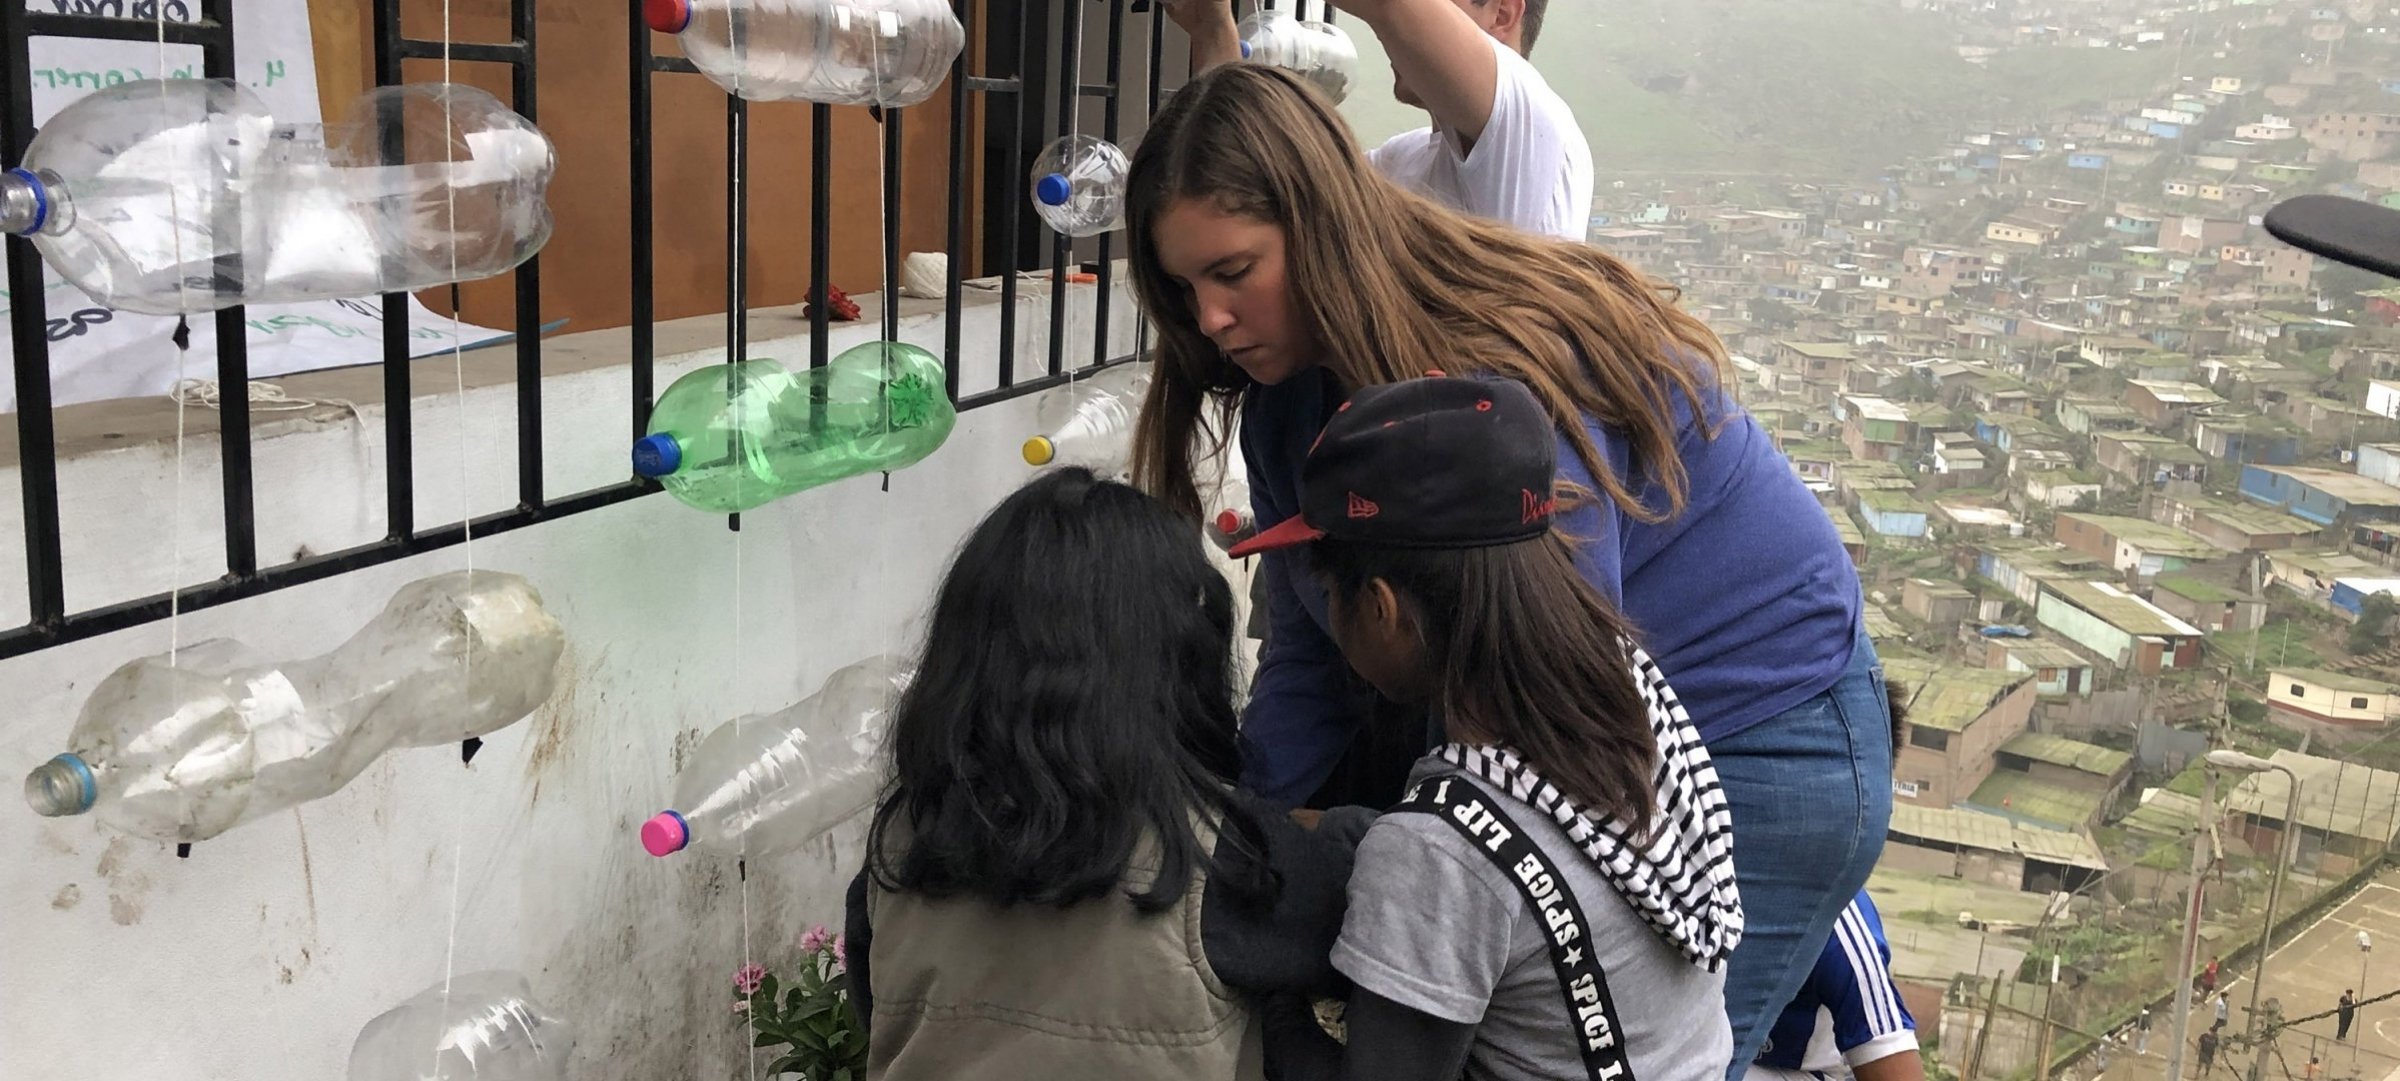 Image of a Michigan Tech student helping two young students with an art project while on a trip to Peru.